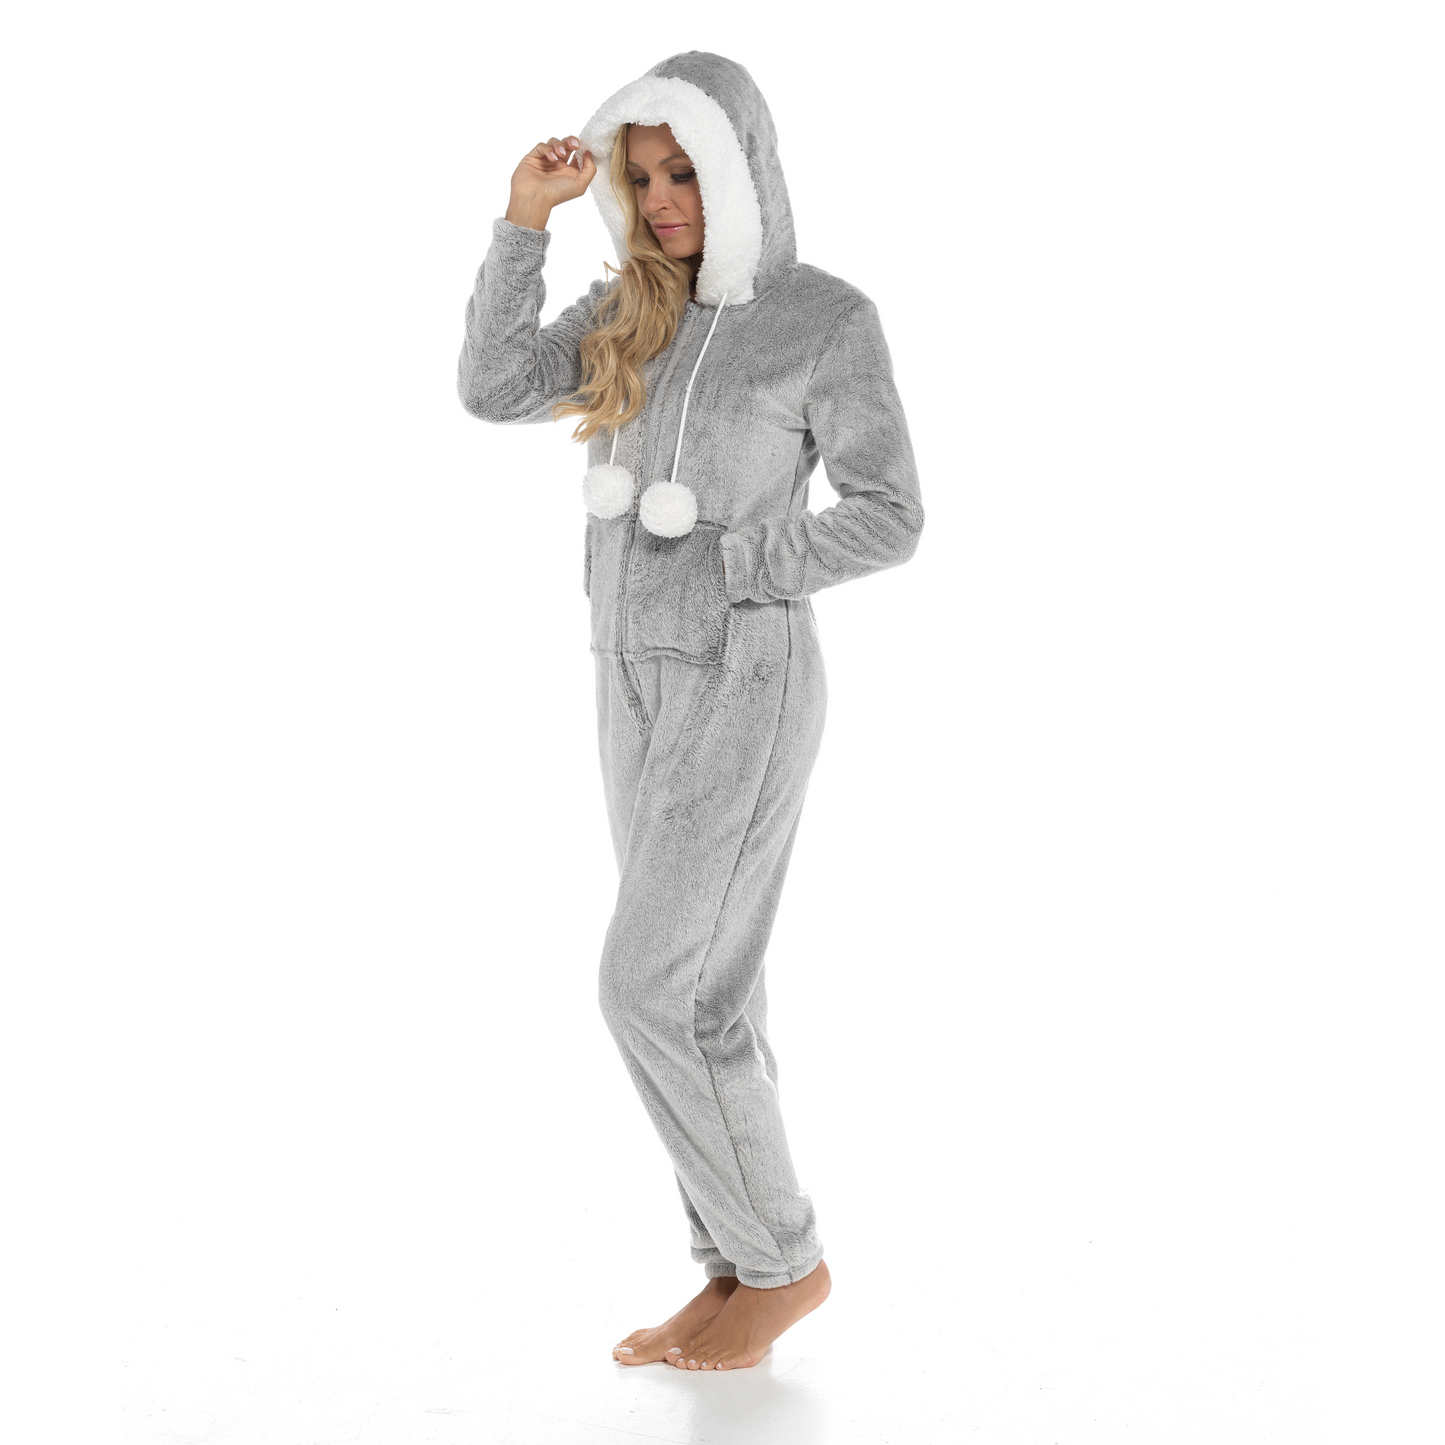 Luxurious Women's Shimmer Fleece Hooded Onesie Pajama with Zip-Up Pockets, Cute Pompoms, Ultra-Soft All-In-One Ladies Warm Nightwear Perfect for Cozy Lounging, Sleepwear, and Loungewear by Daisy Dreamer - Ideal Gift for Winter Comfort and Relaxation